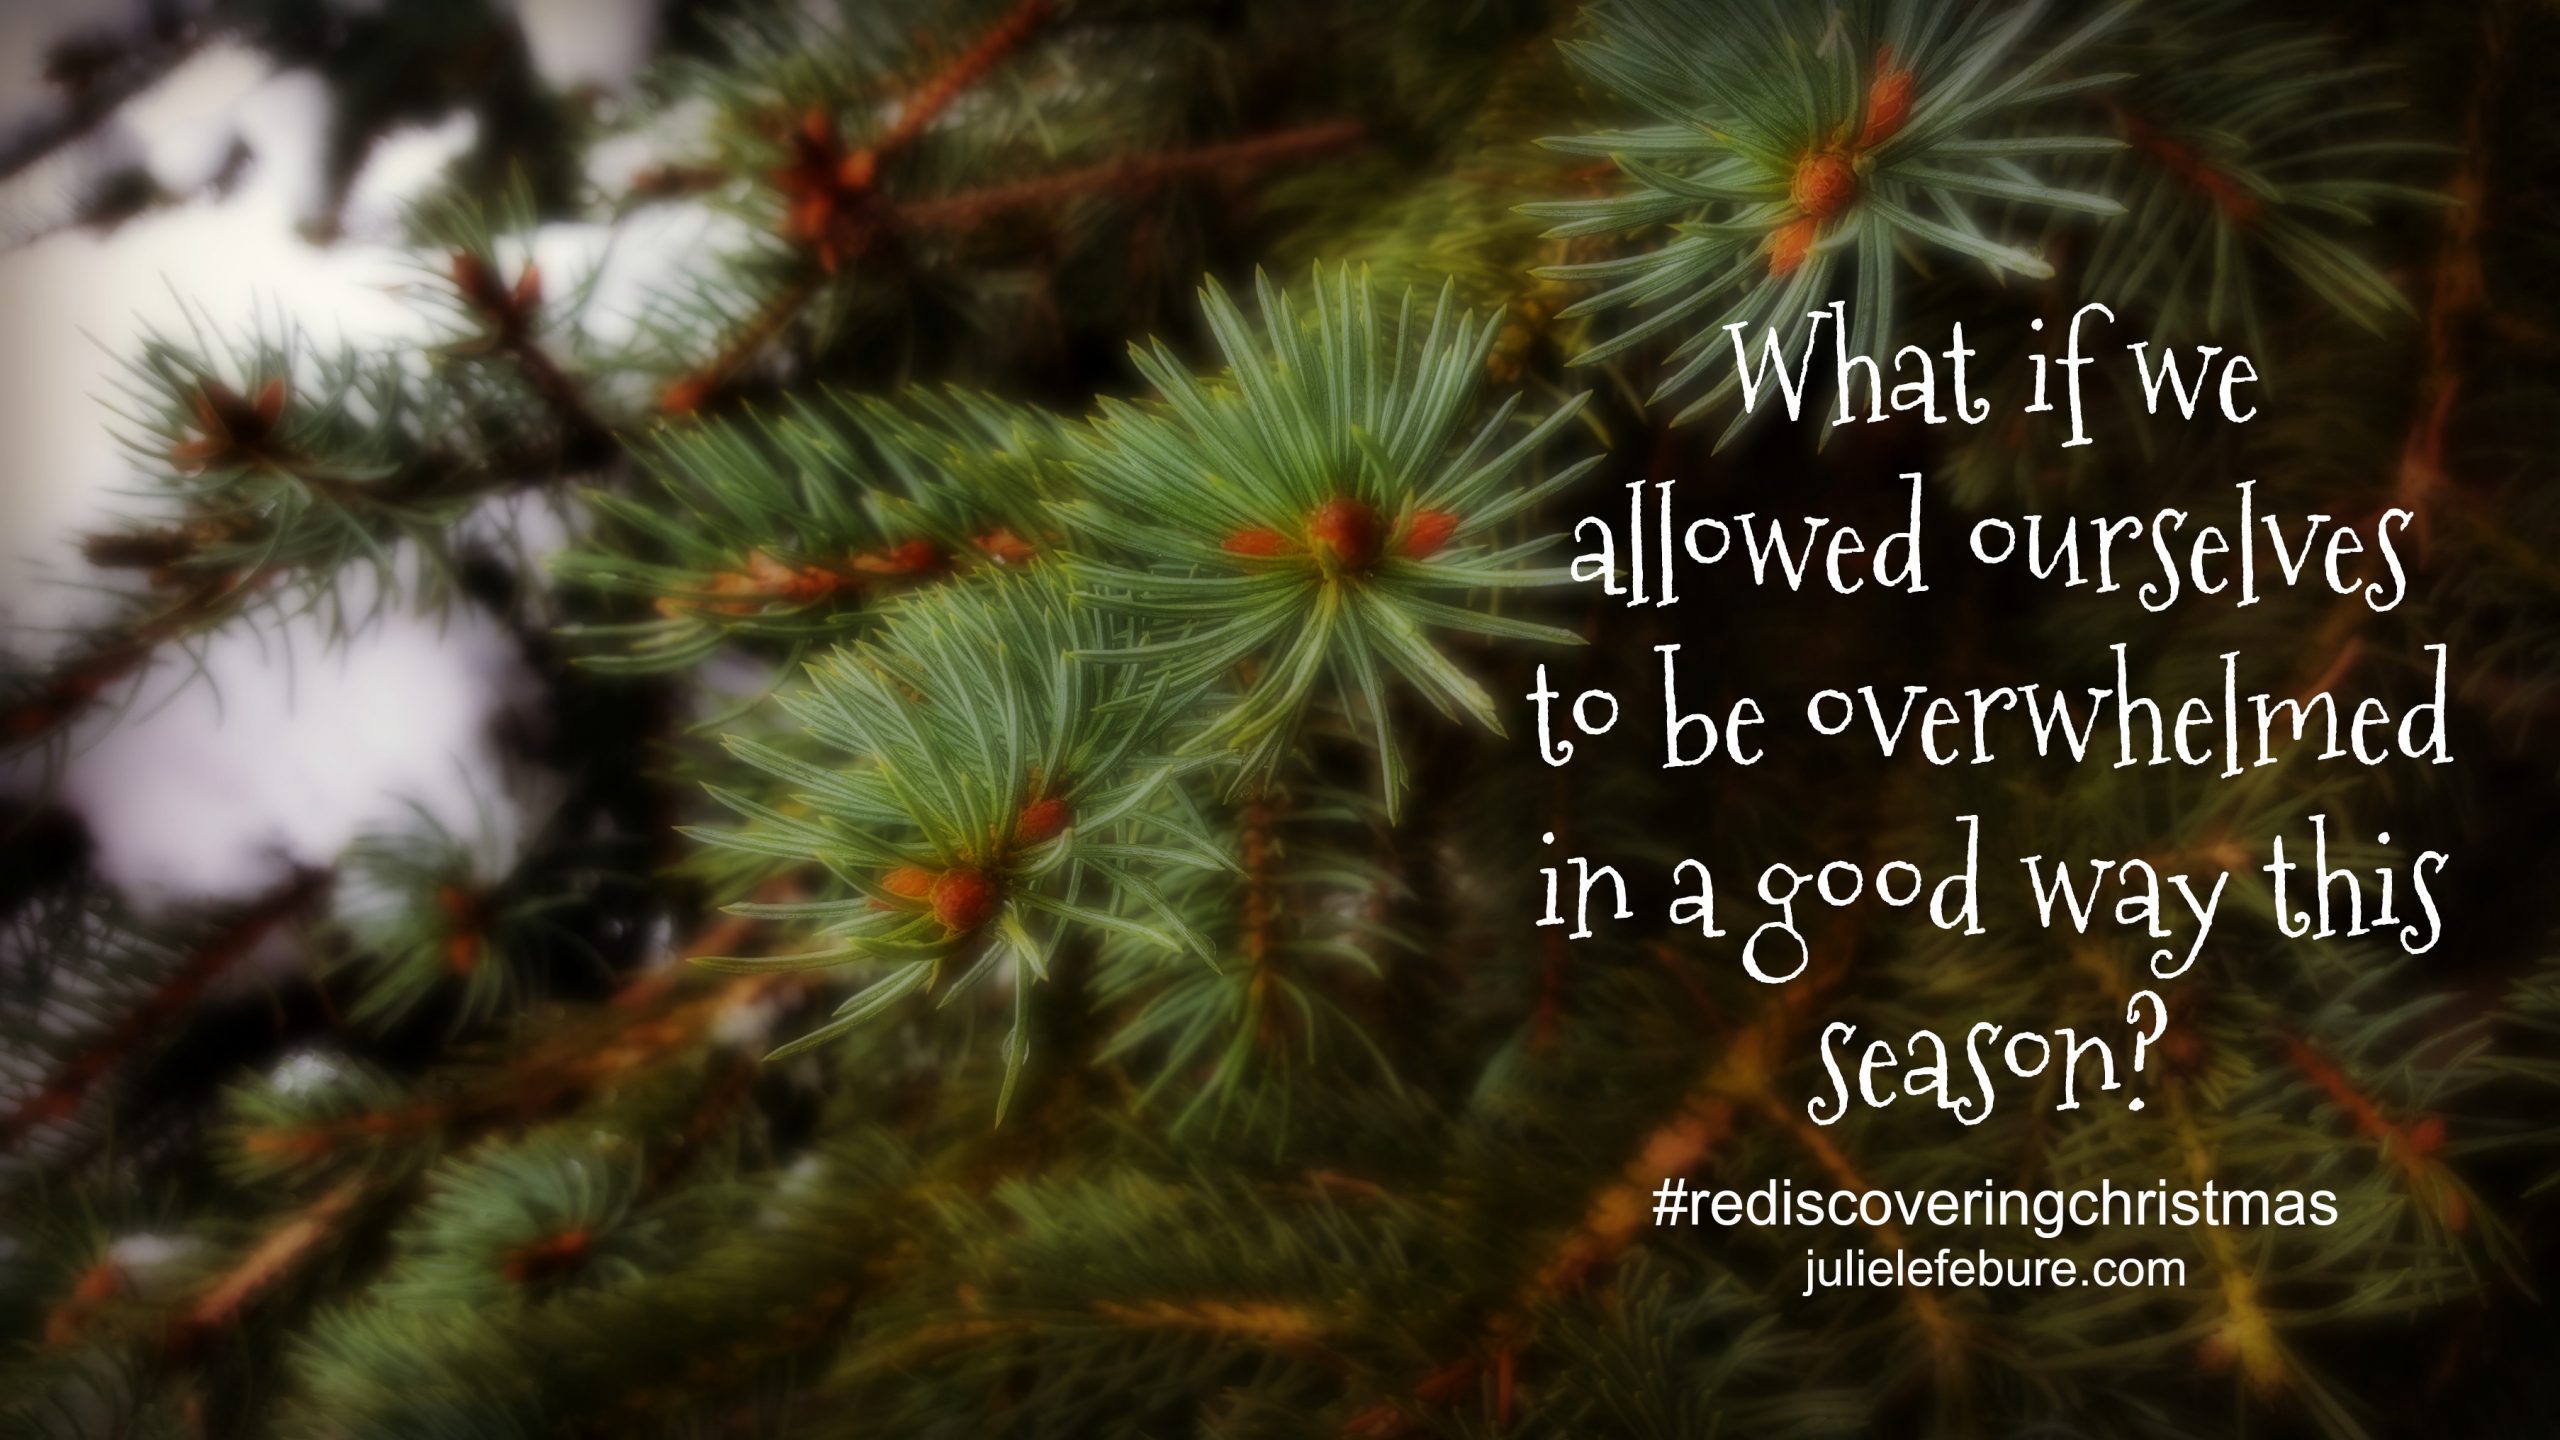 Rediscovering Christmas – Overwhelmed In A Good Way